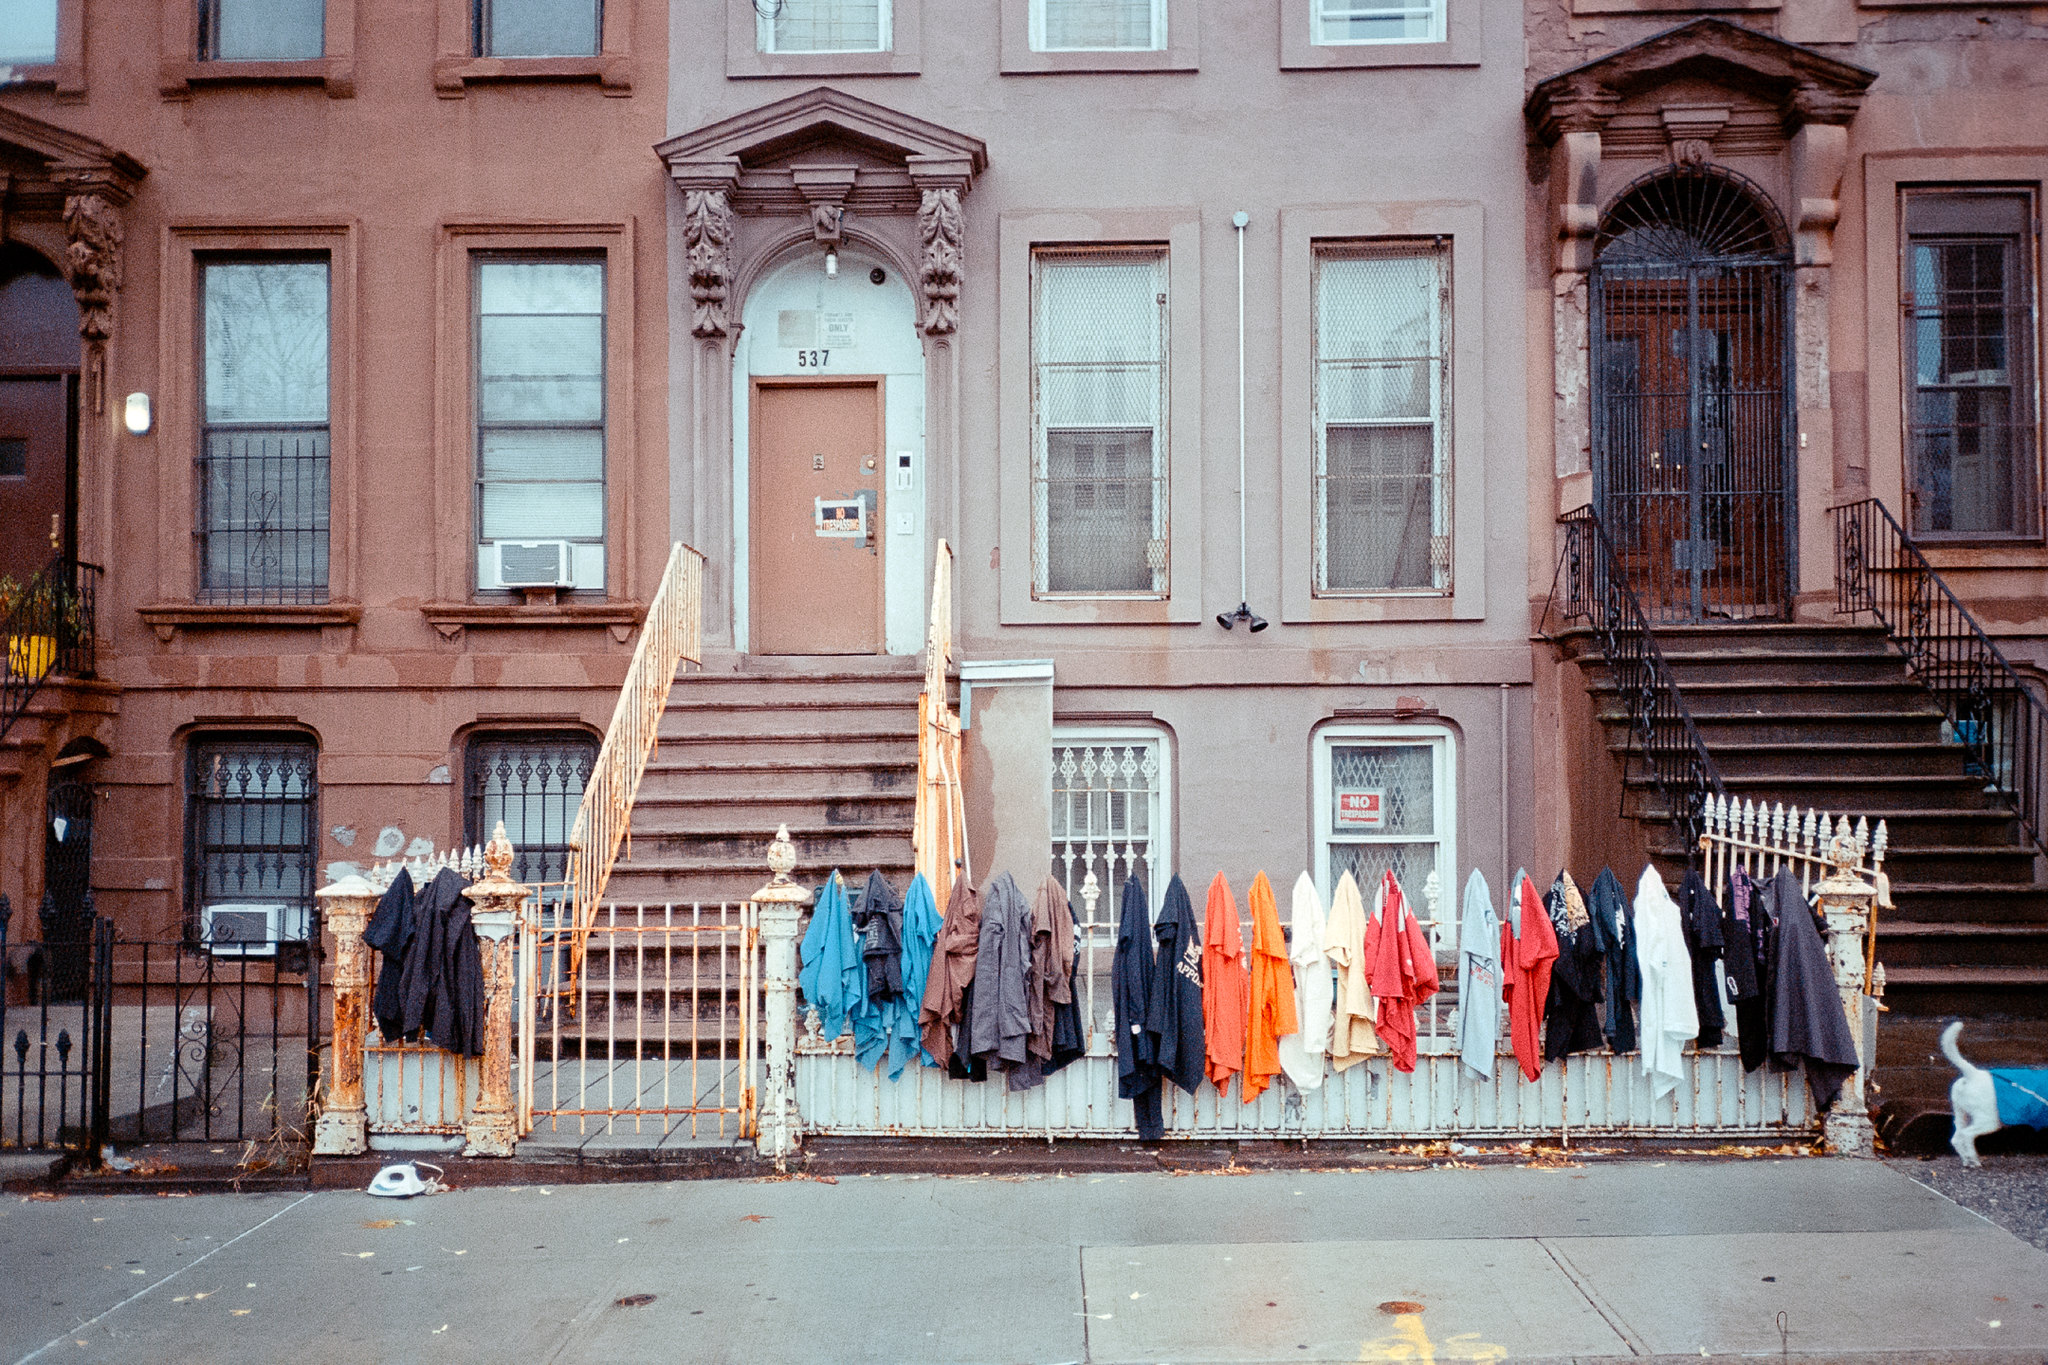 t-shirts hanging outside a brownstone